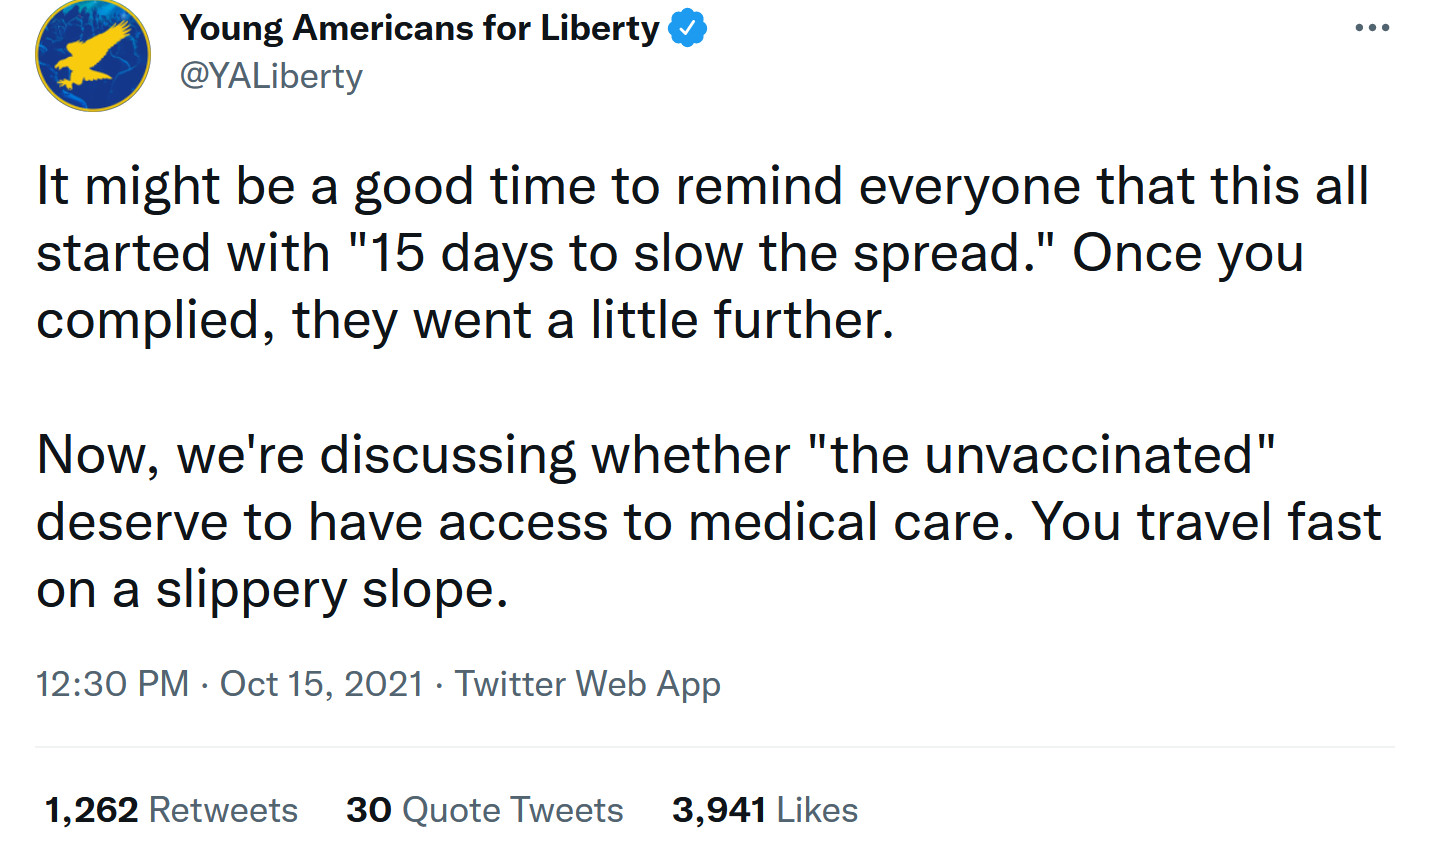 young_american_liberty_unvaccinated_medical_care_10-15-2021.jpg